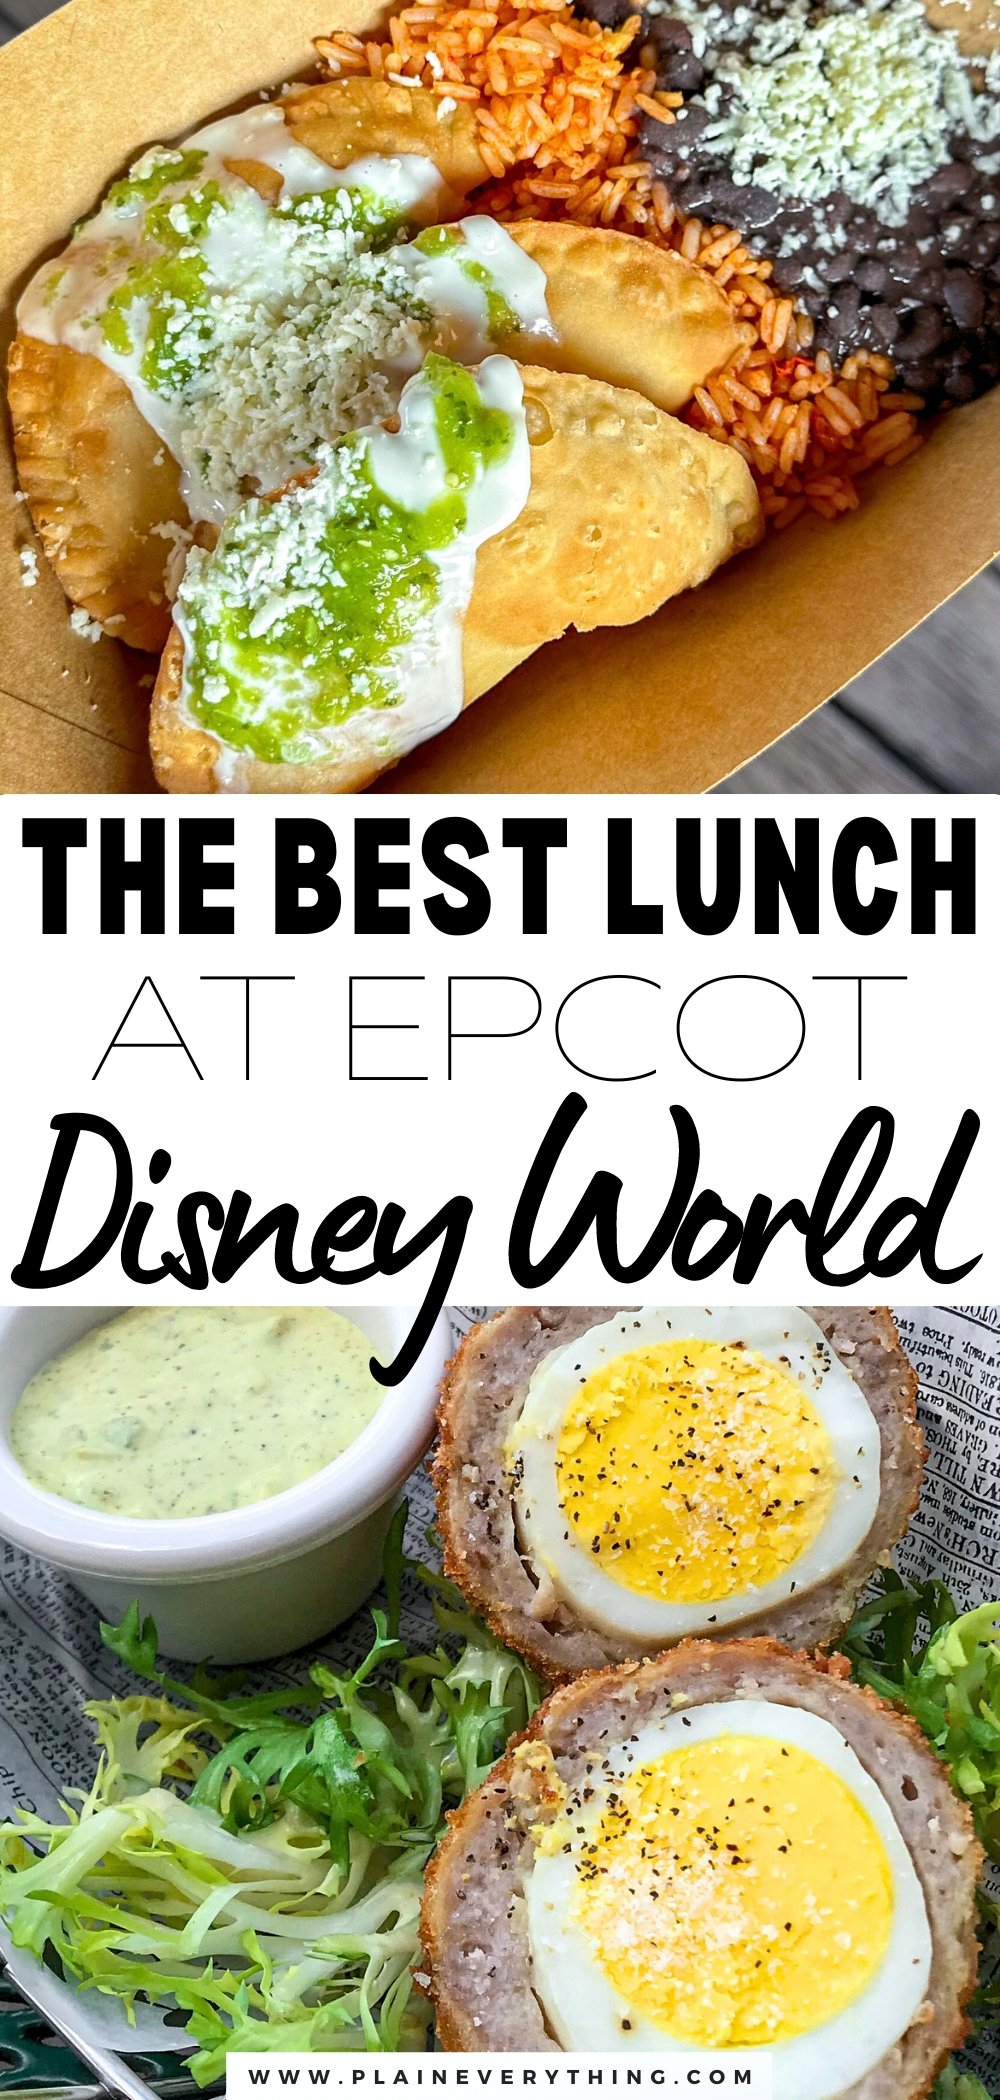 Best Quick Service Lunch At Epcot